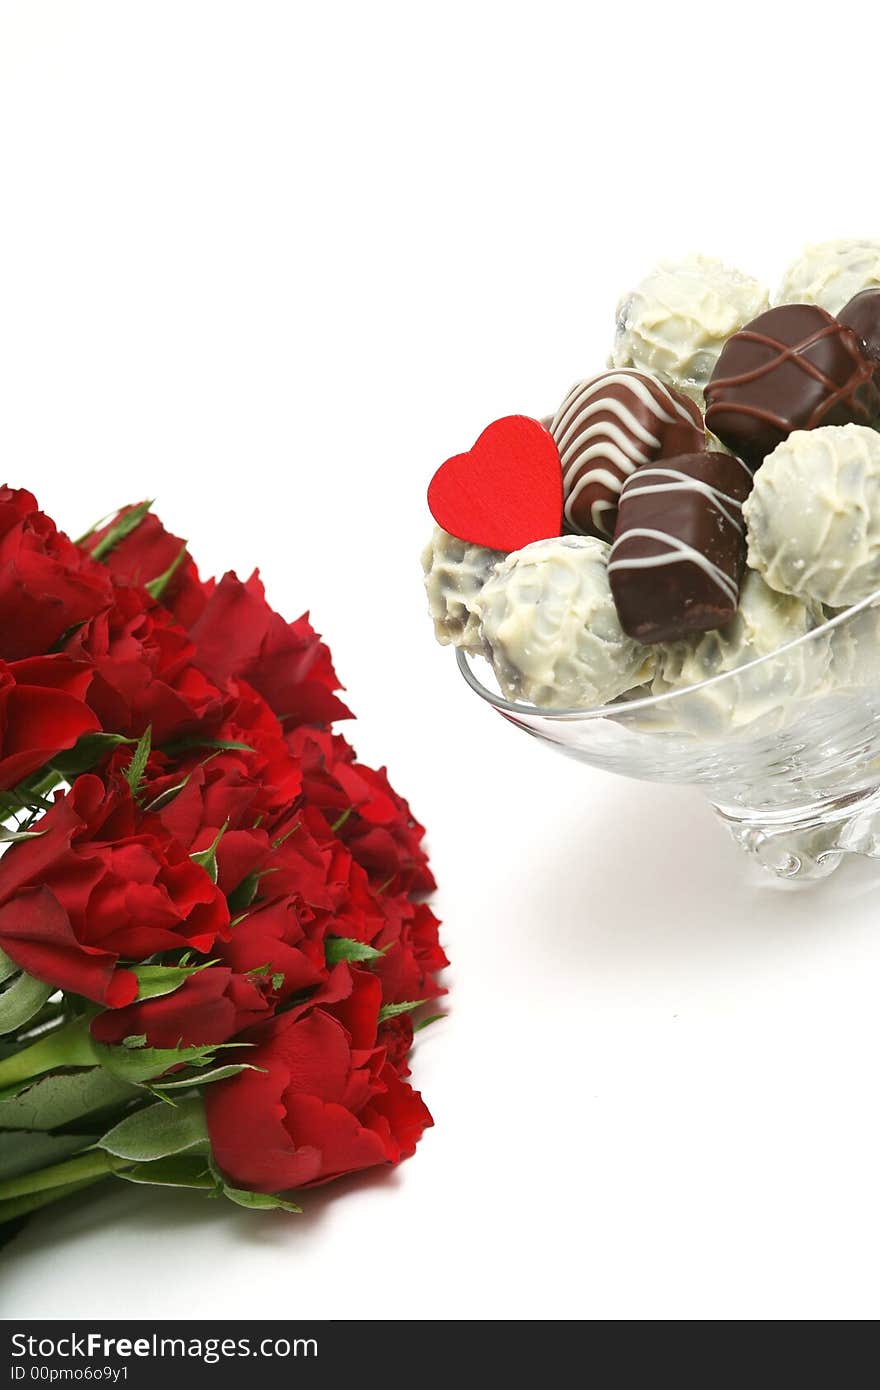 Mixed delicious chocolates with heart and a red rose on white background. Mixed delicious chocolates with heart and a red rose on white background.